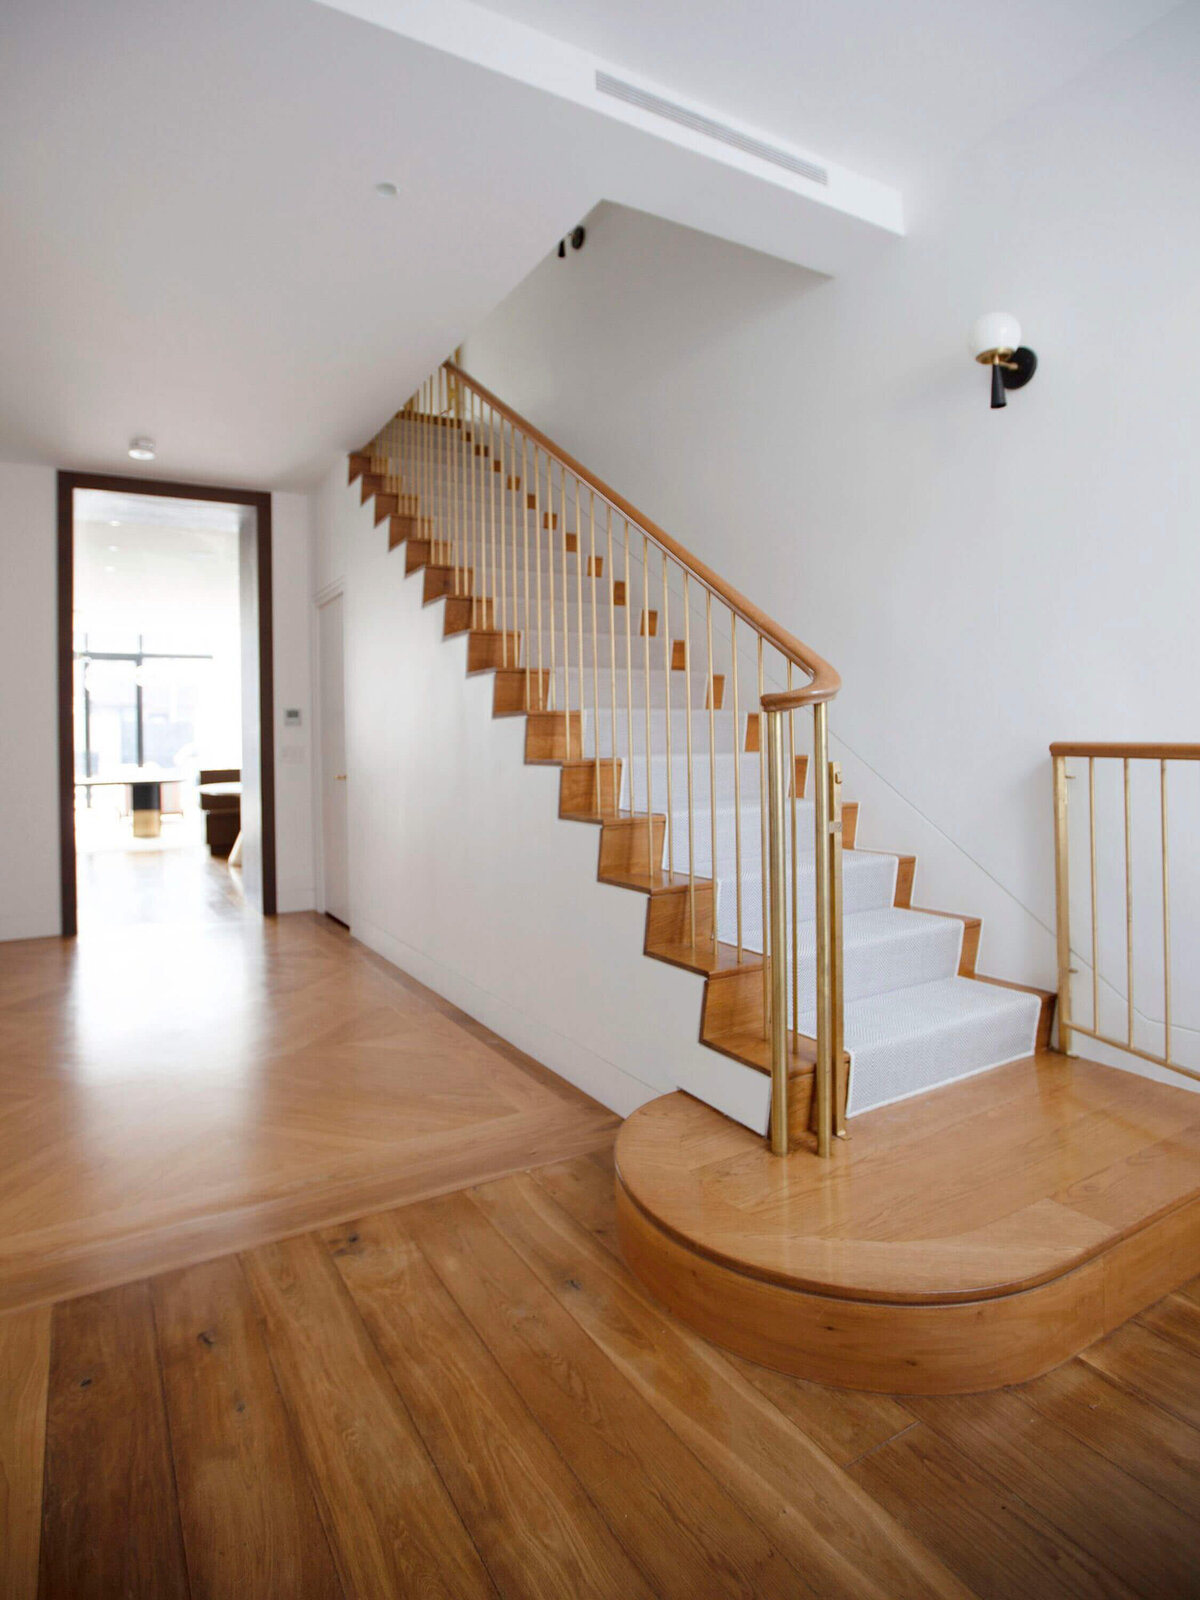 Beautiful natural wood and white stairs with gold railings.